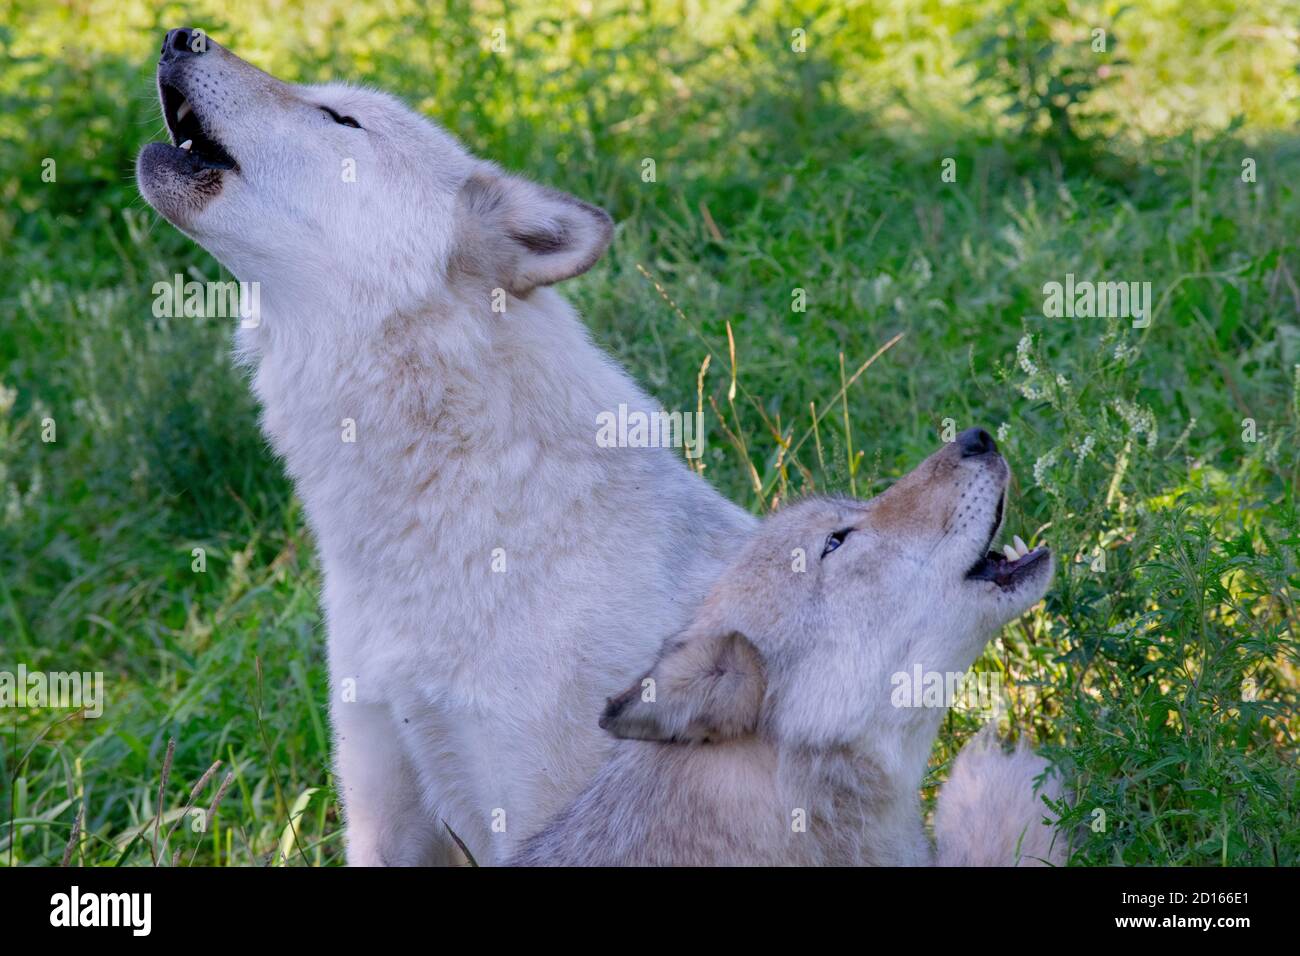 The howling Wolves. Stock Photo